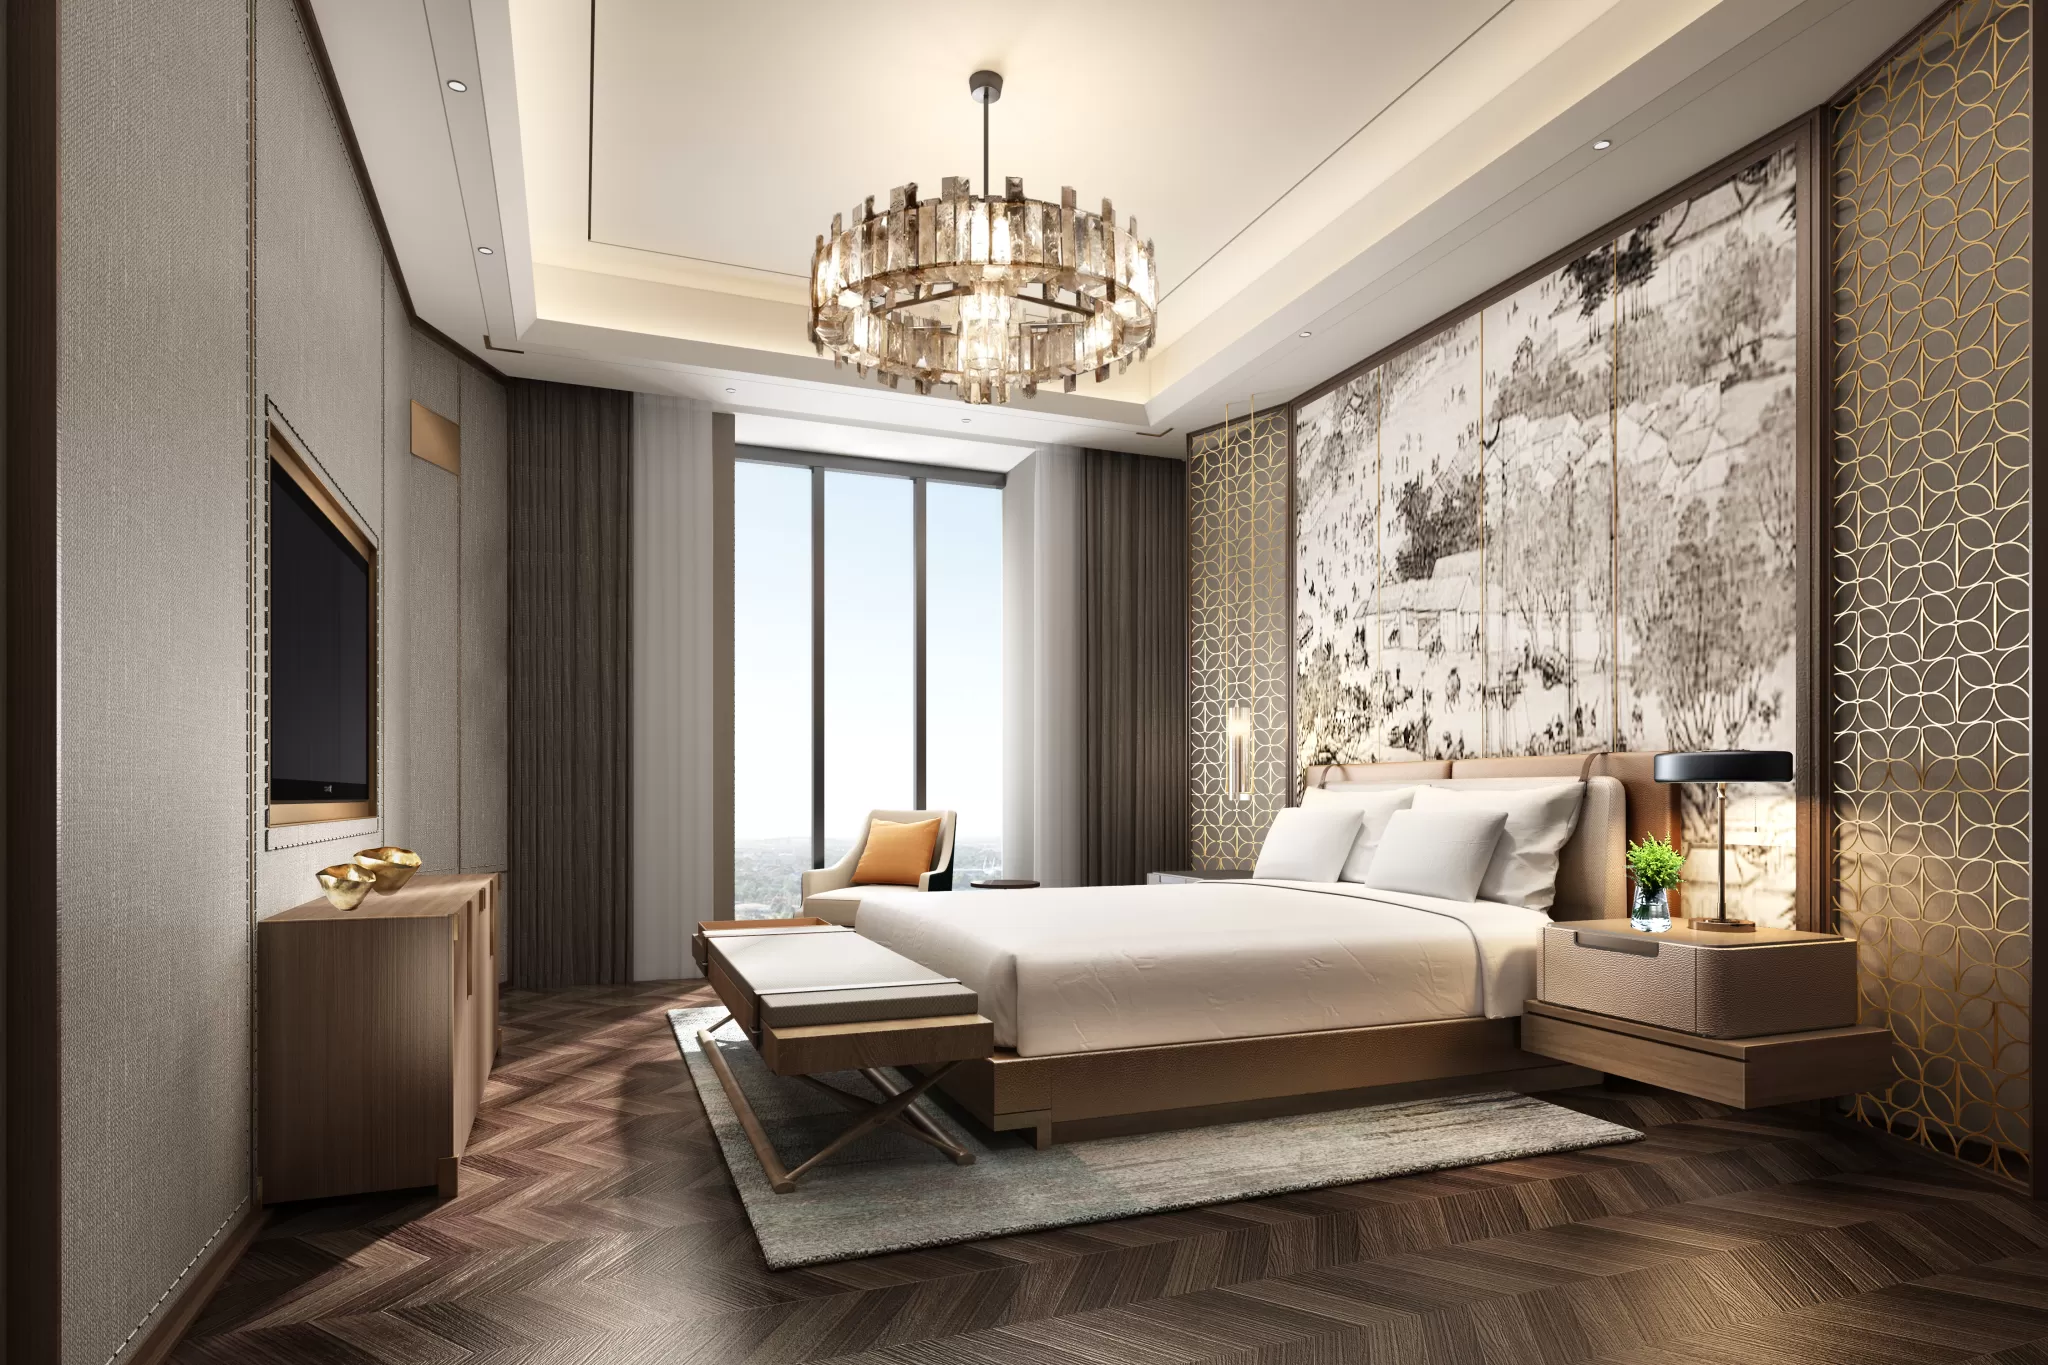 DESMOD INTERIOR 2021 (VRAY)/5. BEDROOM – 2. CHINESE STYLES – 147